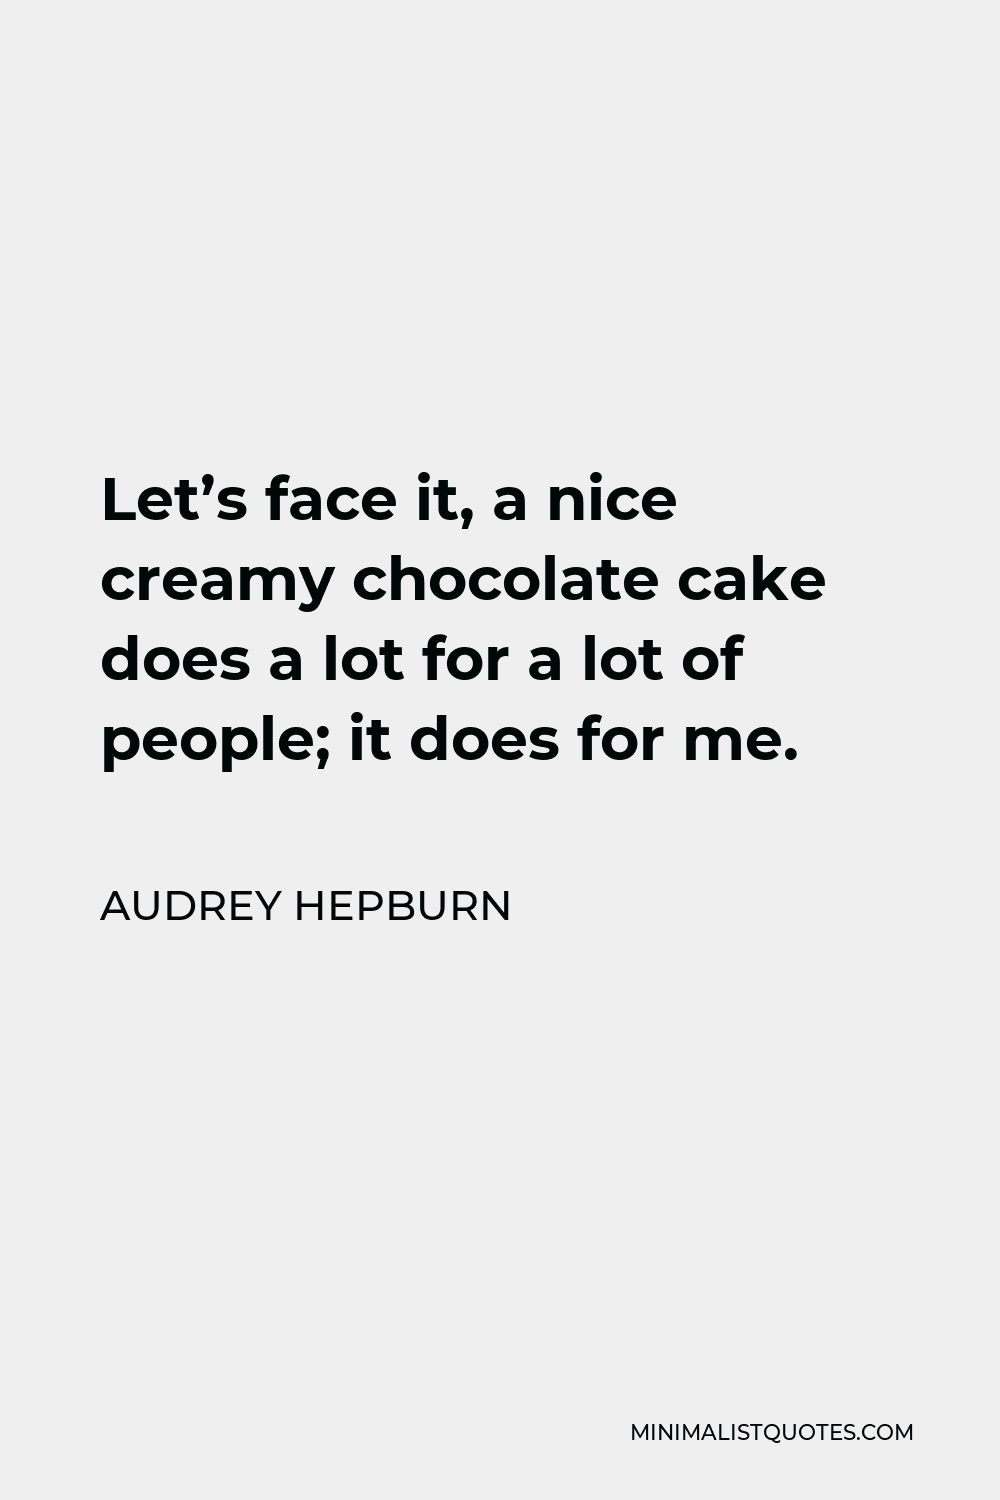 Audrey Hepburn Quote: Let's face it, a nice creamy chocolate cake does ...